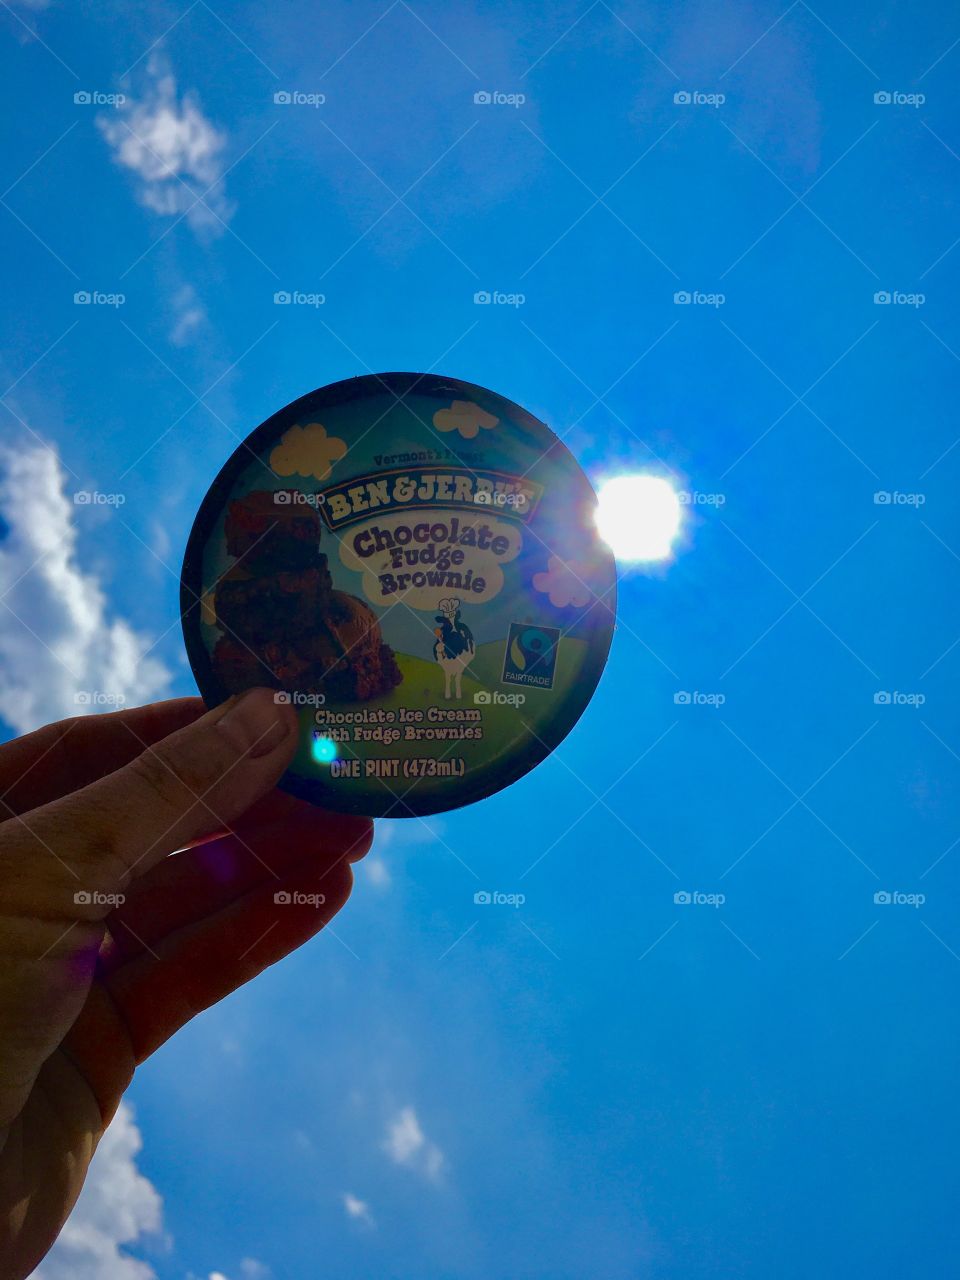 Eclipse with Ben & Jerry's